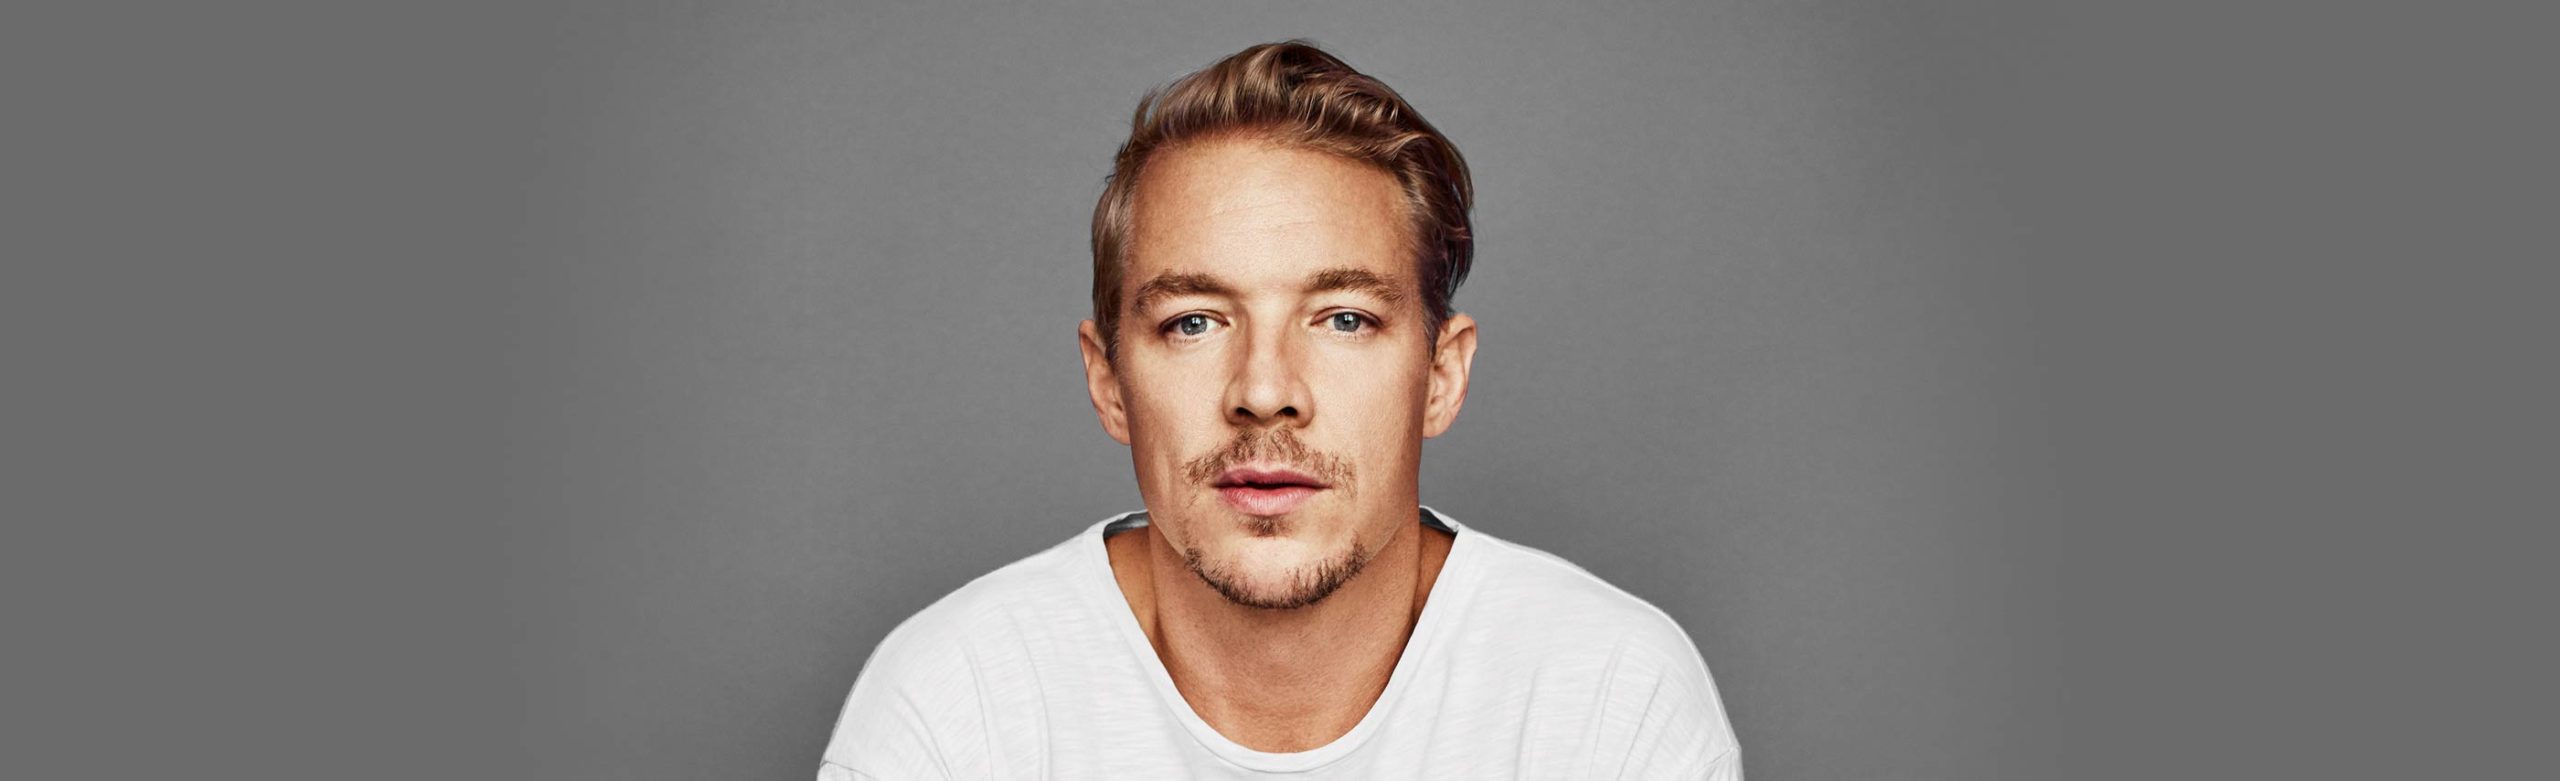 JUST ANNOUNCED: Diplo is Bringing a Mad Decent Night to The Wilma Image